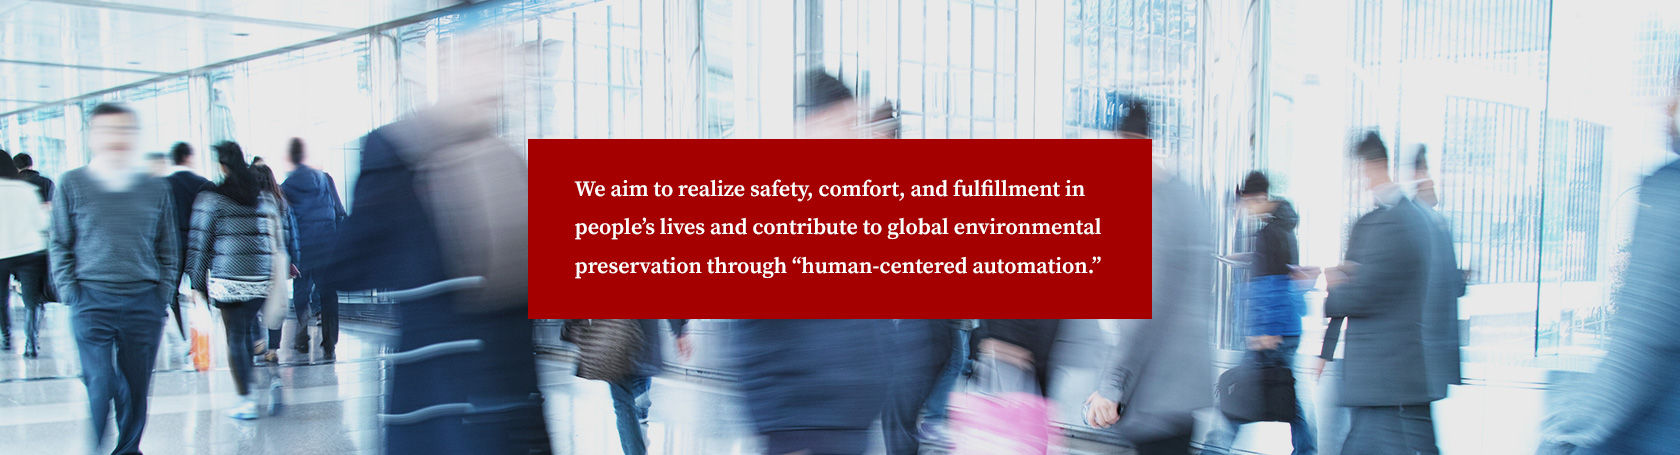 We aim to realize safety, comfort, and fulfillment in people’s lives and contribute to global environmental preservation through “human-centered automation.”